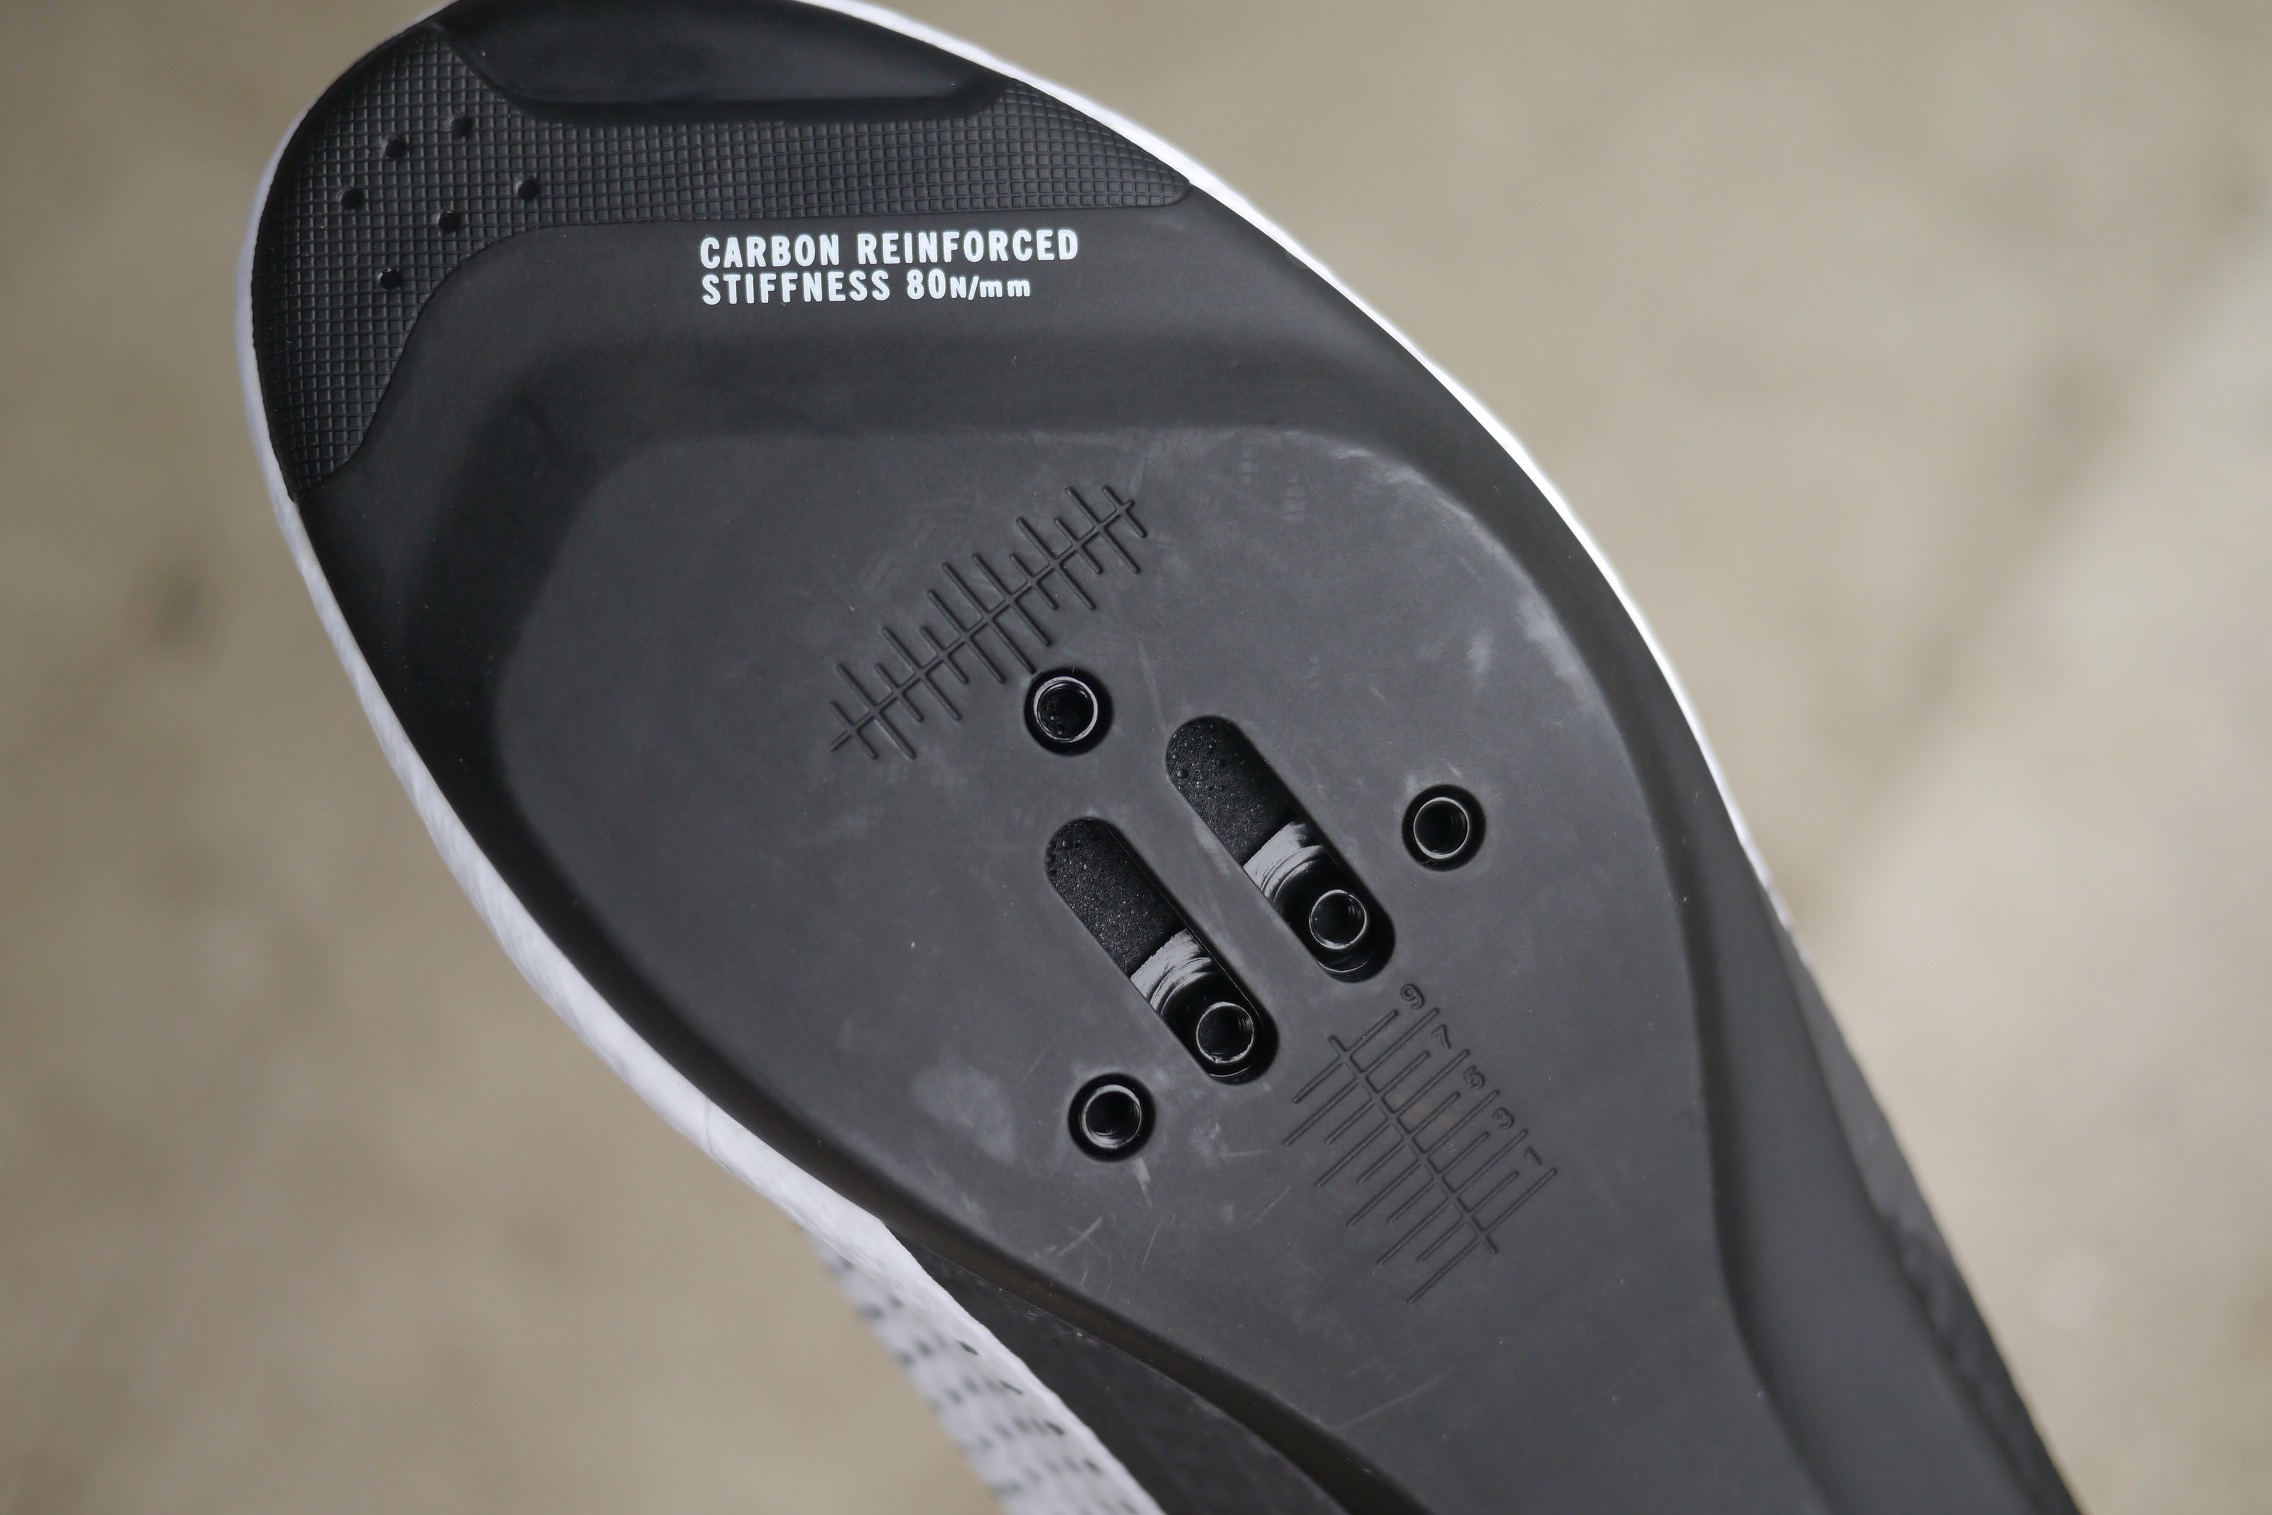 Giro Cadet road bike shoes sole detail showing both 3-bolt and 2-bolt cleat compatibility